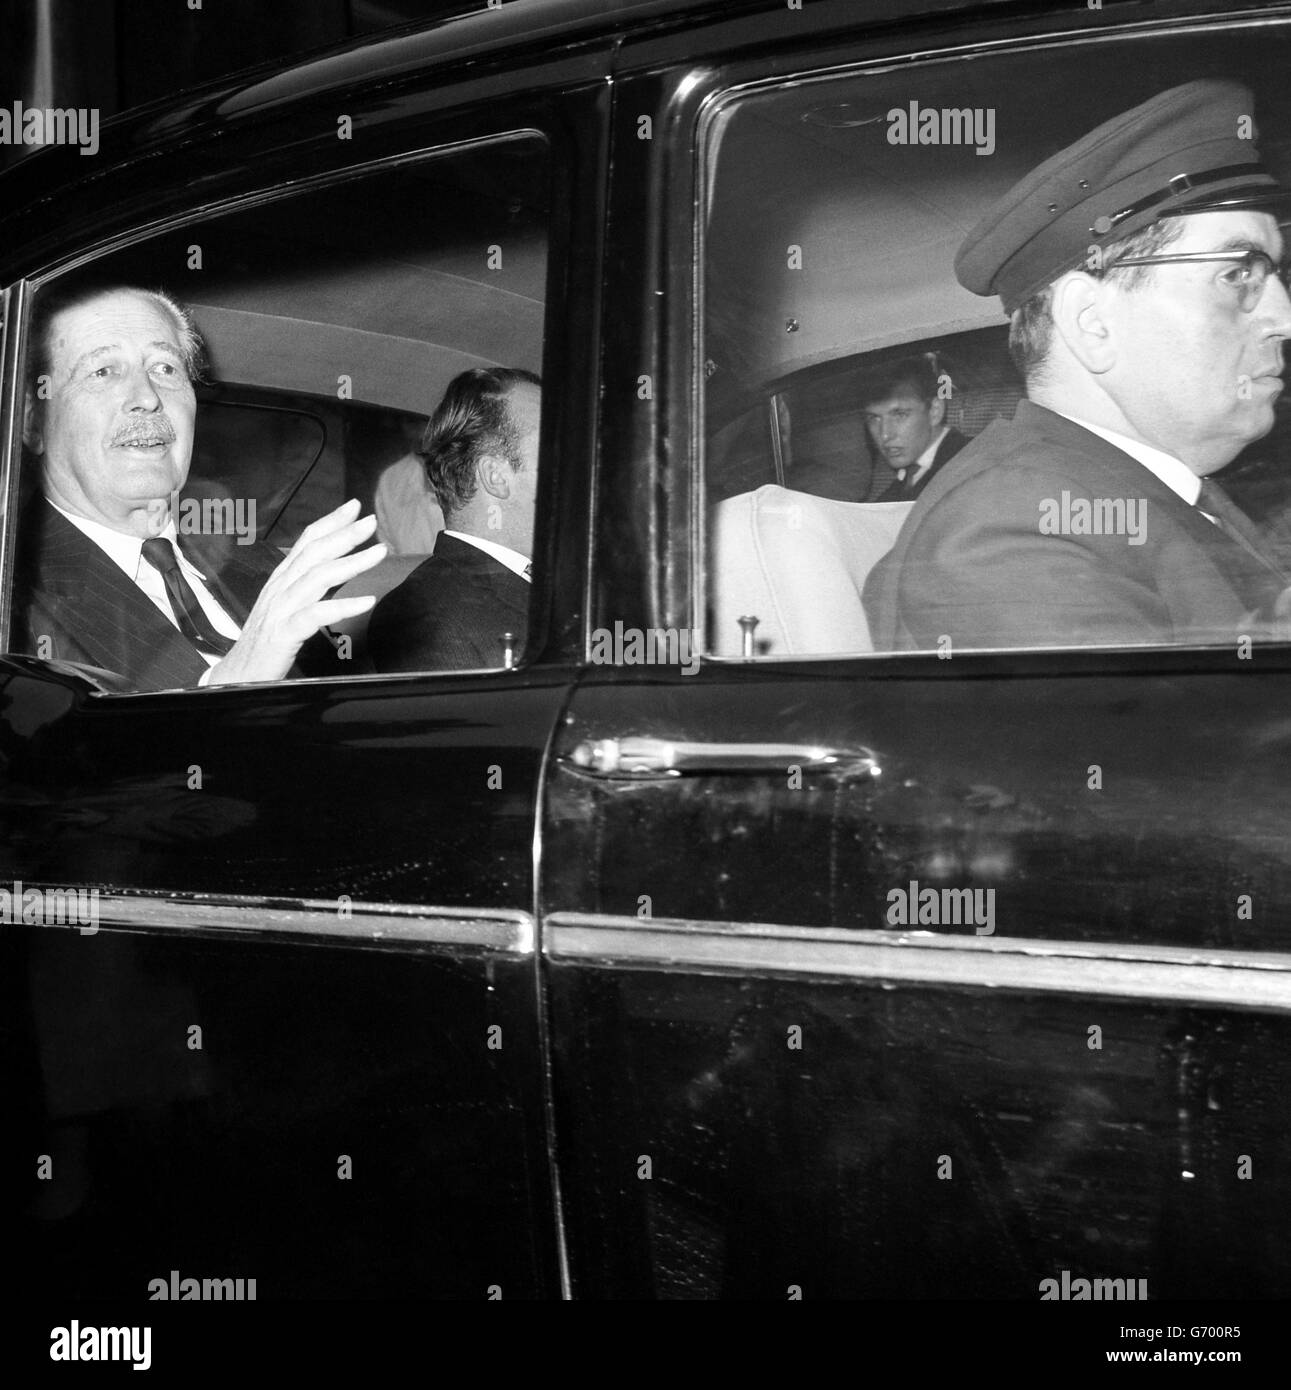 The Prime Minister, waves to bystanders as he drives from Admiralty House London, S.W., on his way to the House of Commons, where he was to make a statement on the Cuban crisis. Parliament reassembled for Prorogation, the ceremony winding up the present session. The Queen will open the new session. Stock Photo